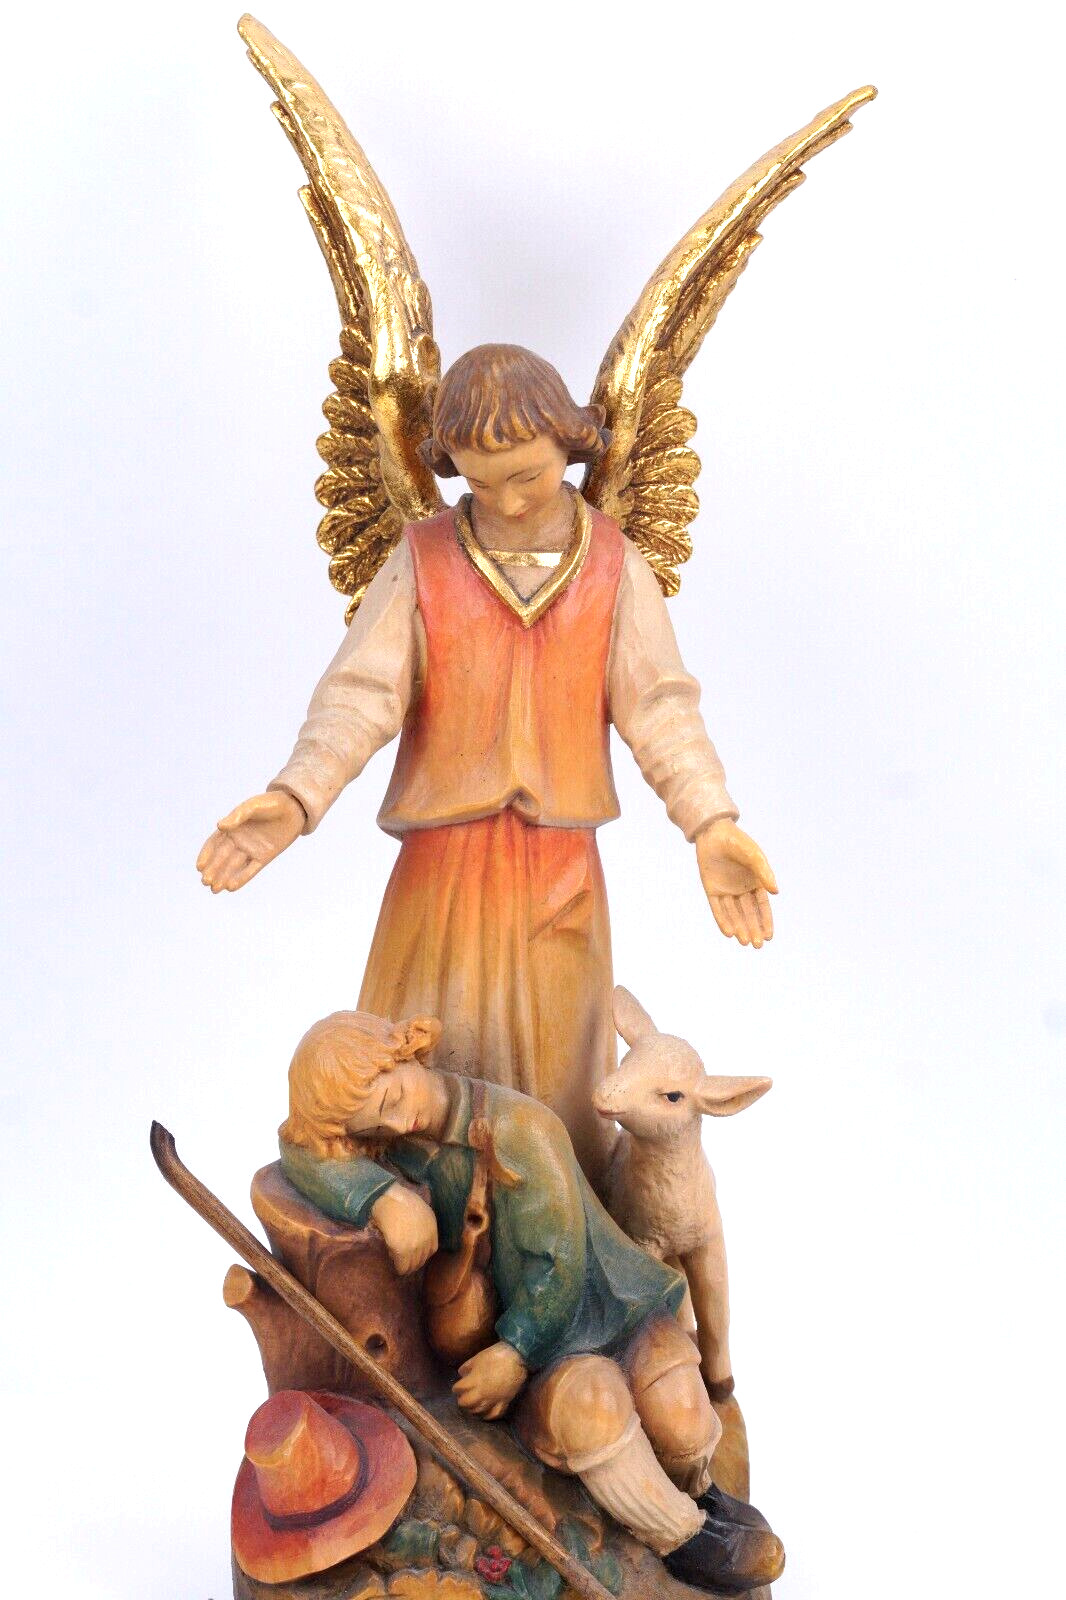 ANRI BACHLECHNER 12 INCH GUARDIAN ANGEL FIGURINE RARE WOOD ITALY VINTAGE READ